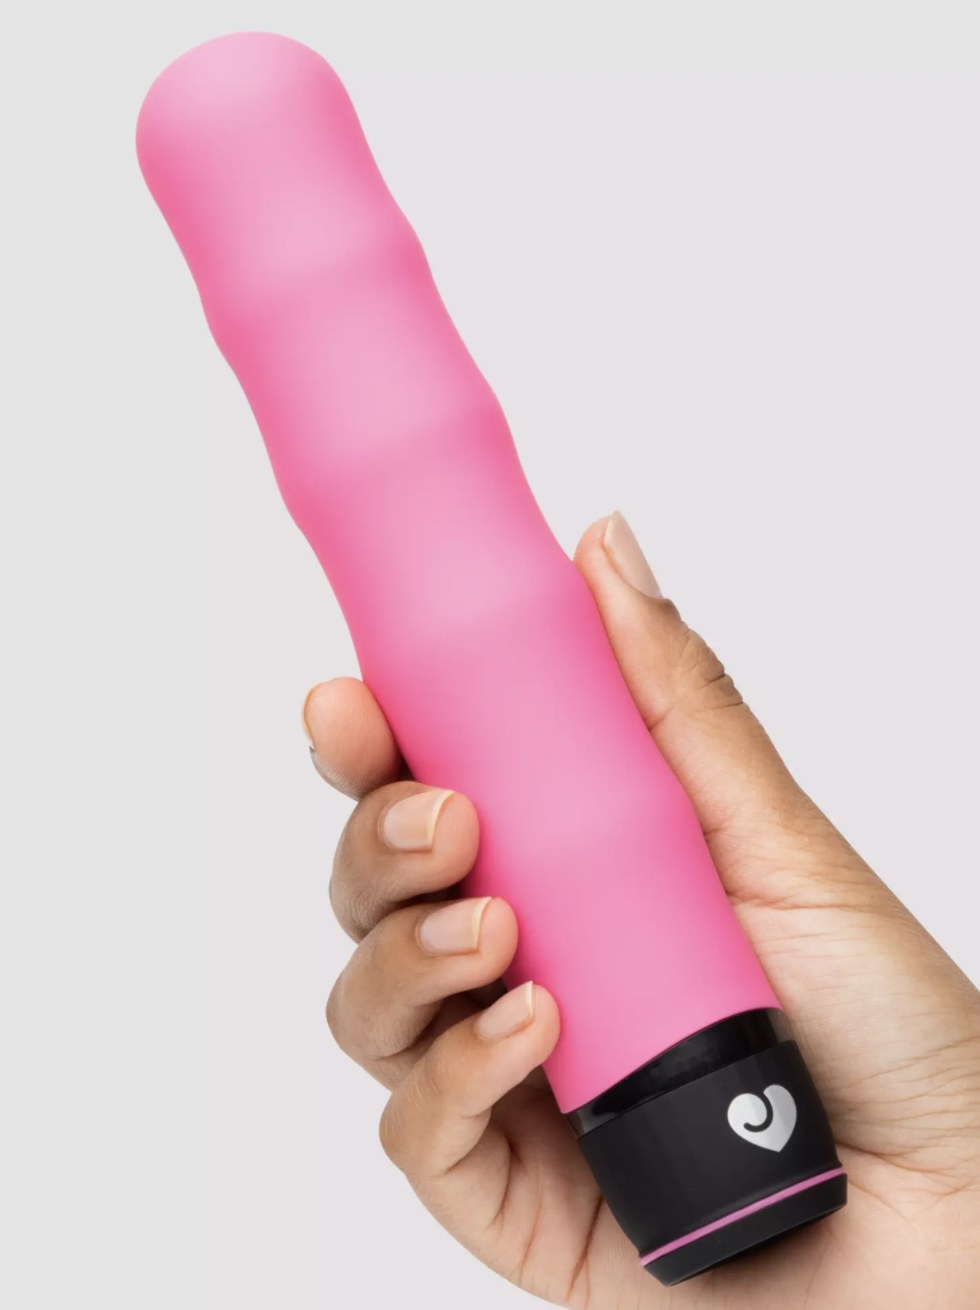 The pink vibrator held in someone&#x27;s hand